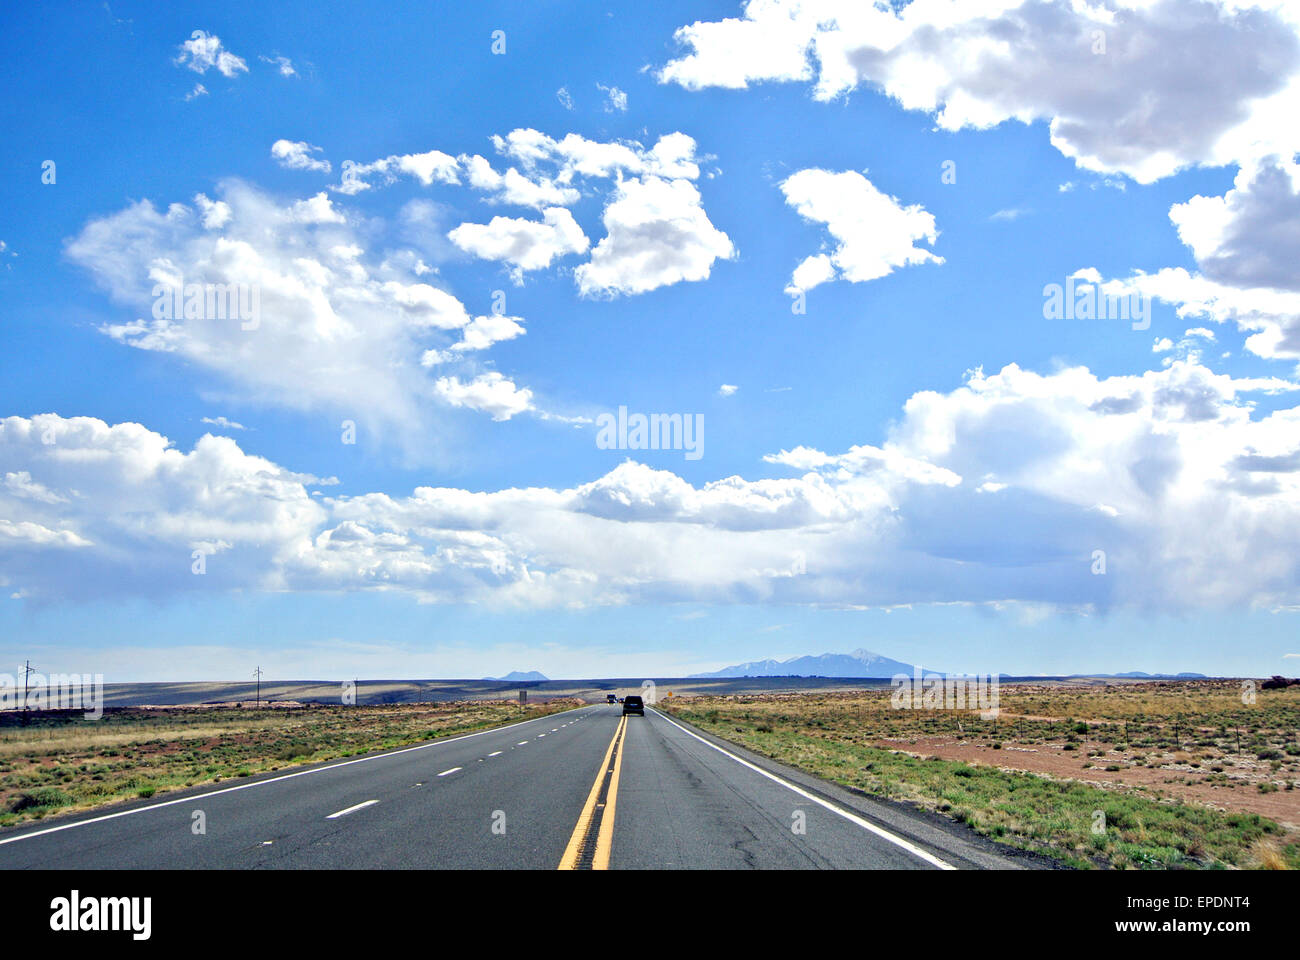 highway 89 A heading south from grand canyon to flagstaff arizona Stock Photo